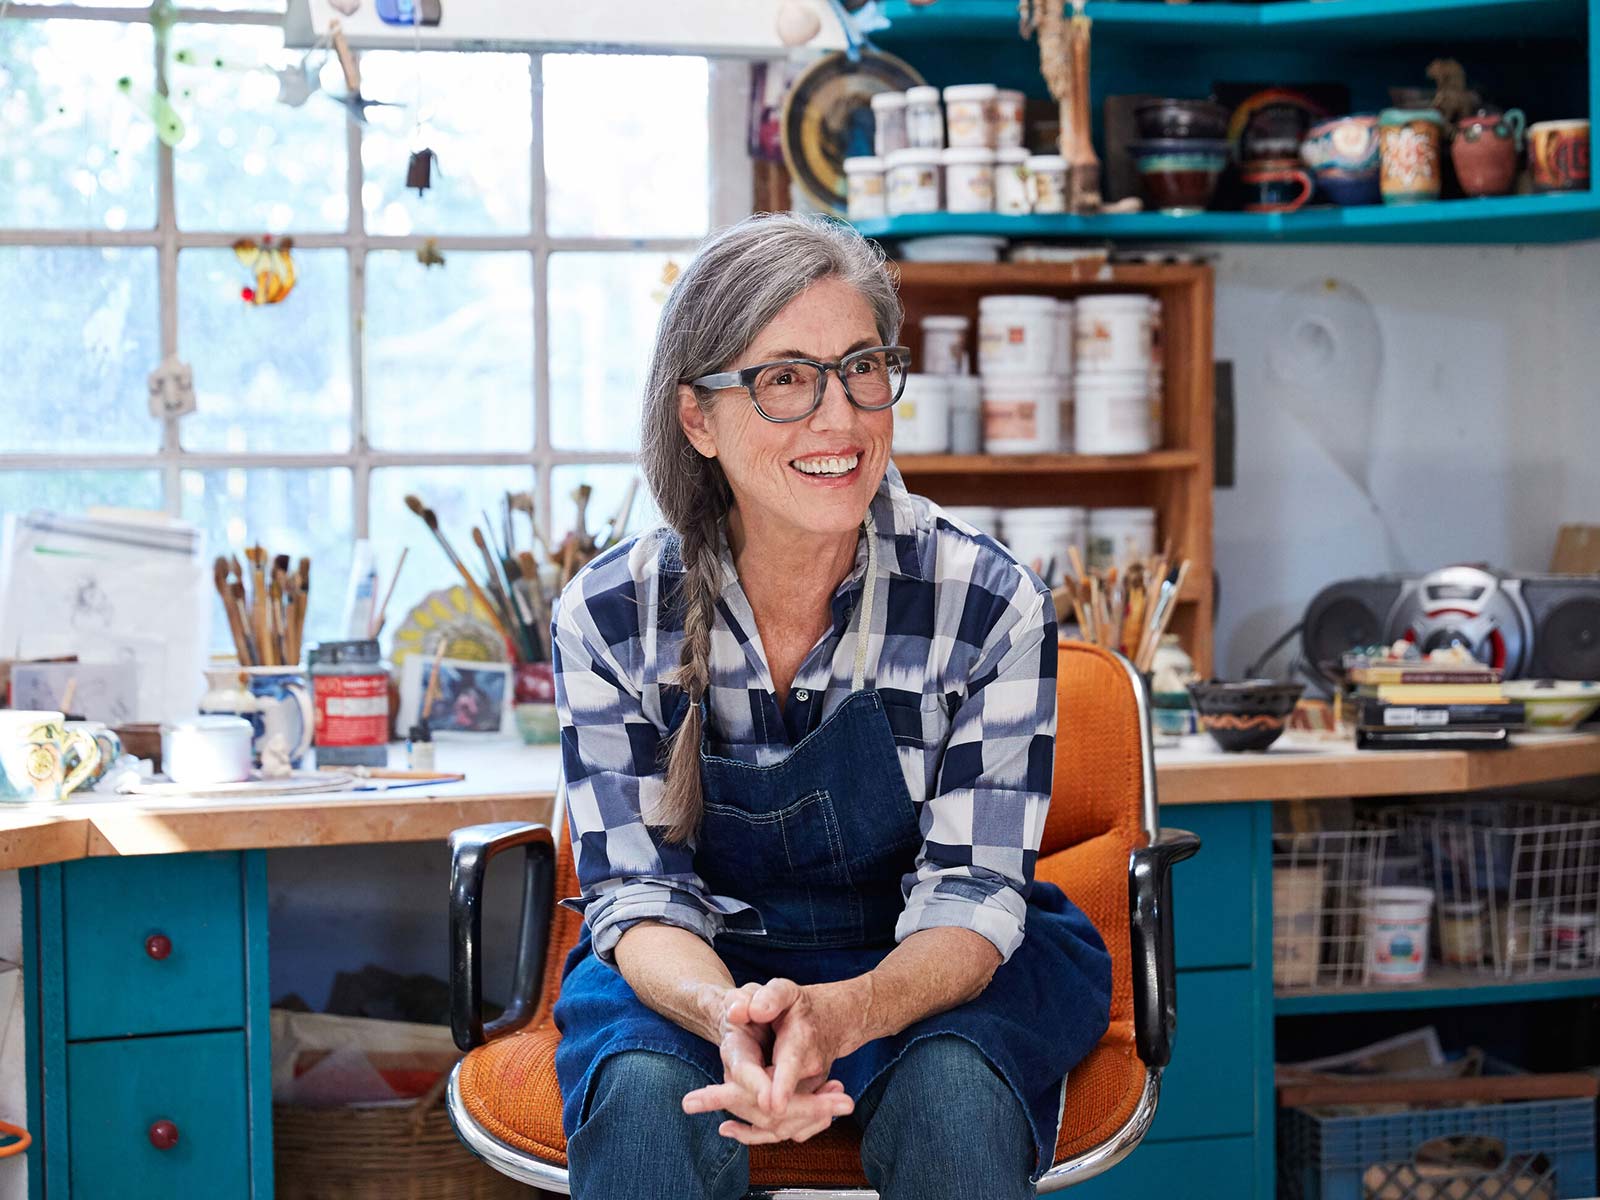 Female artist with gray side braid and glasses in a blue apron sitting in front of her studio workbench